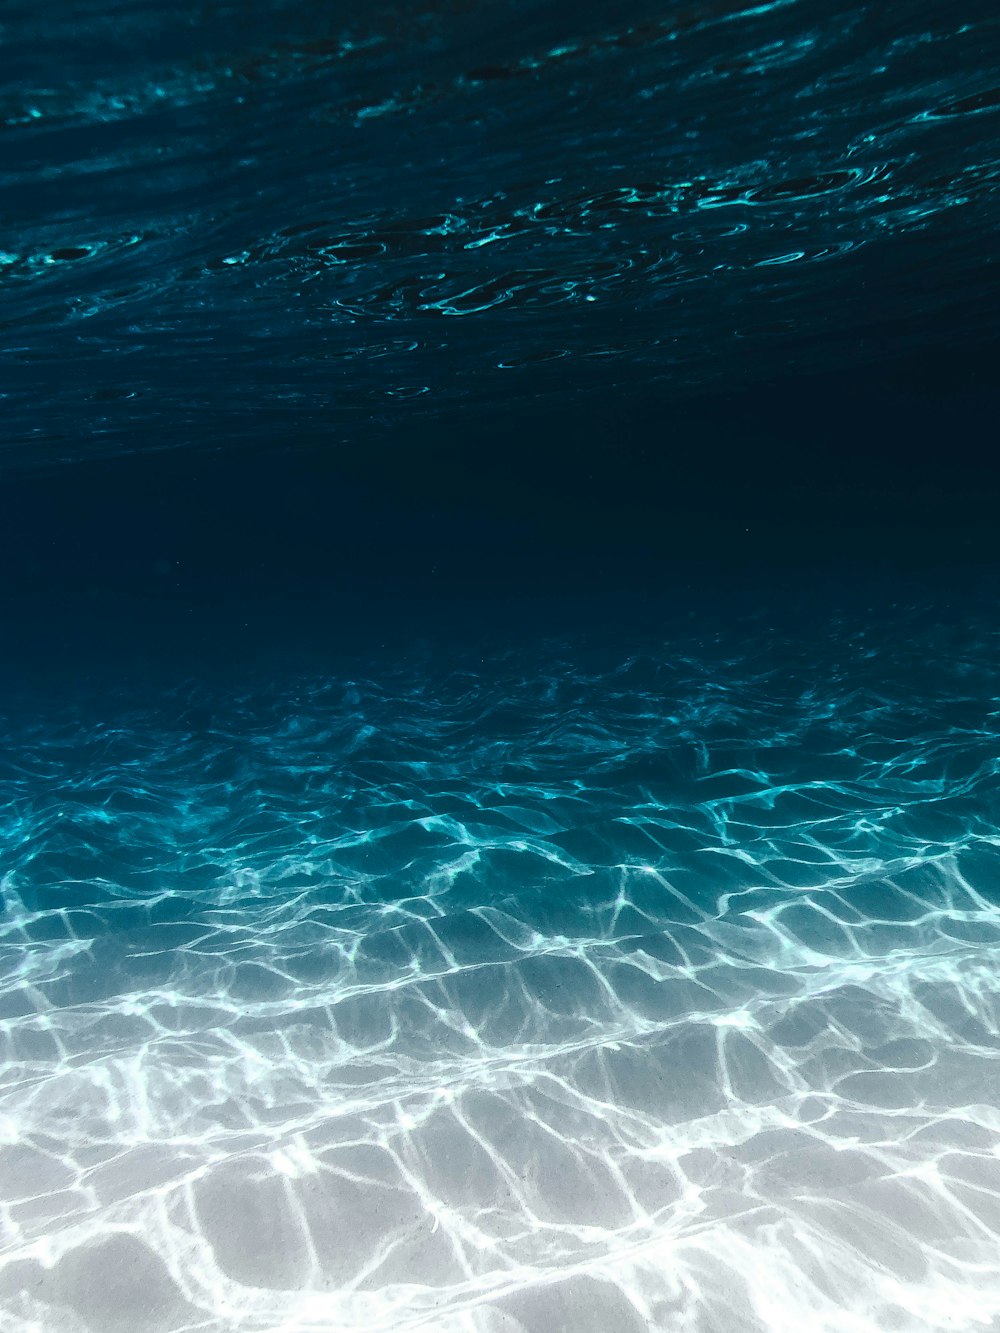 Underwater Background Pictures | Download Free Images on Unsplash